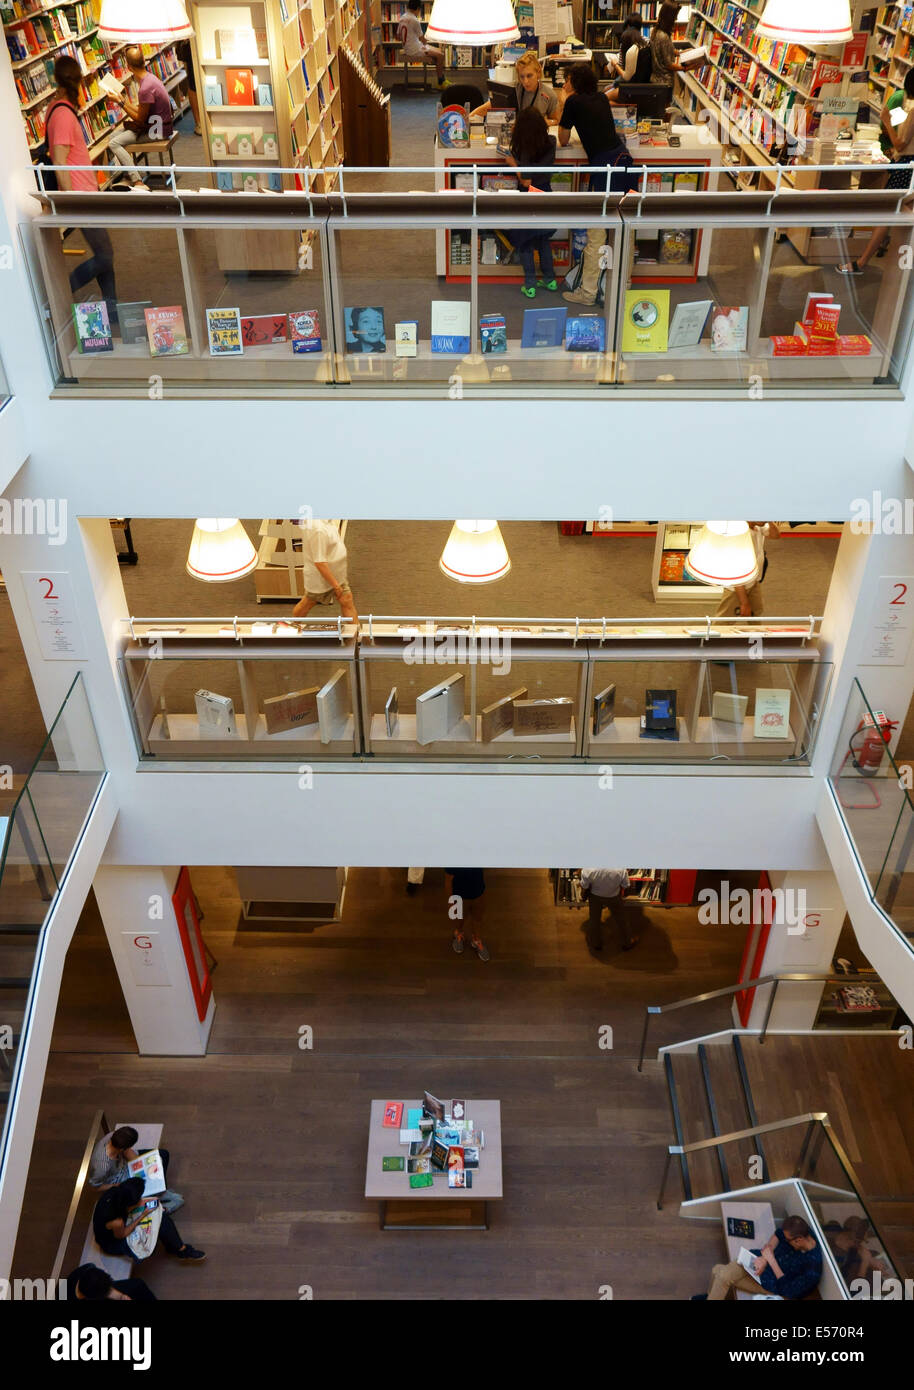 New Foyles book store in Charing Cross Road, London Stock Photo